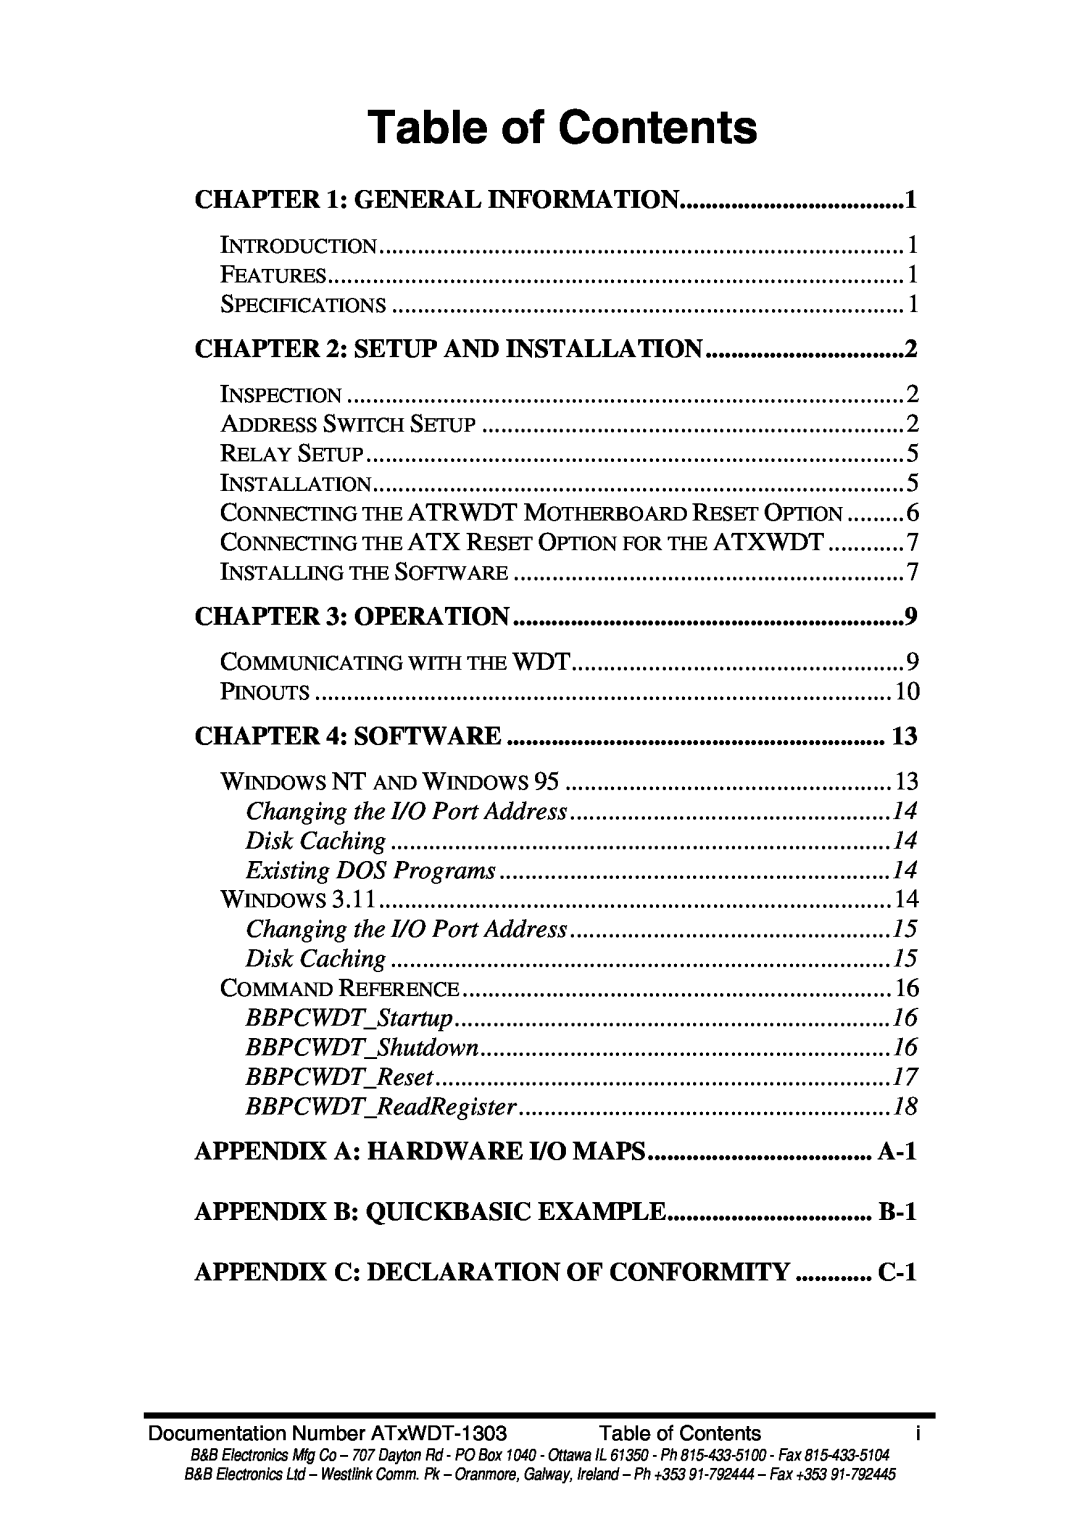 B&B Electronics ATXWDT Table of Contents, Changing the I/O Port Address, Disk Caching, Existing DOS Programs, BBPCWDTReset 